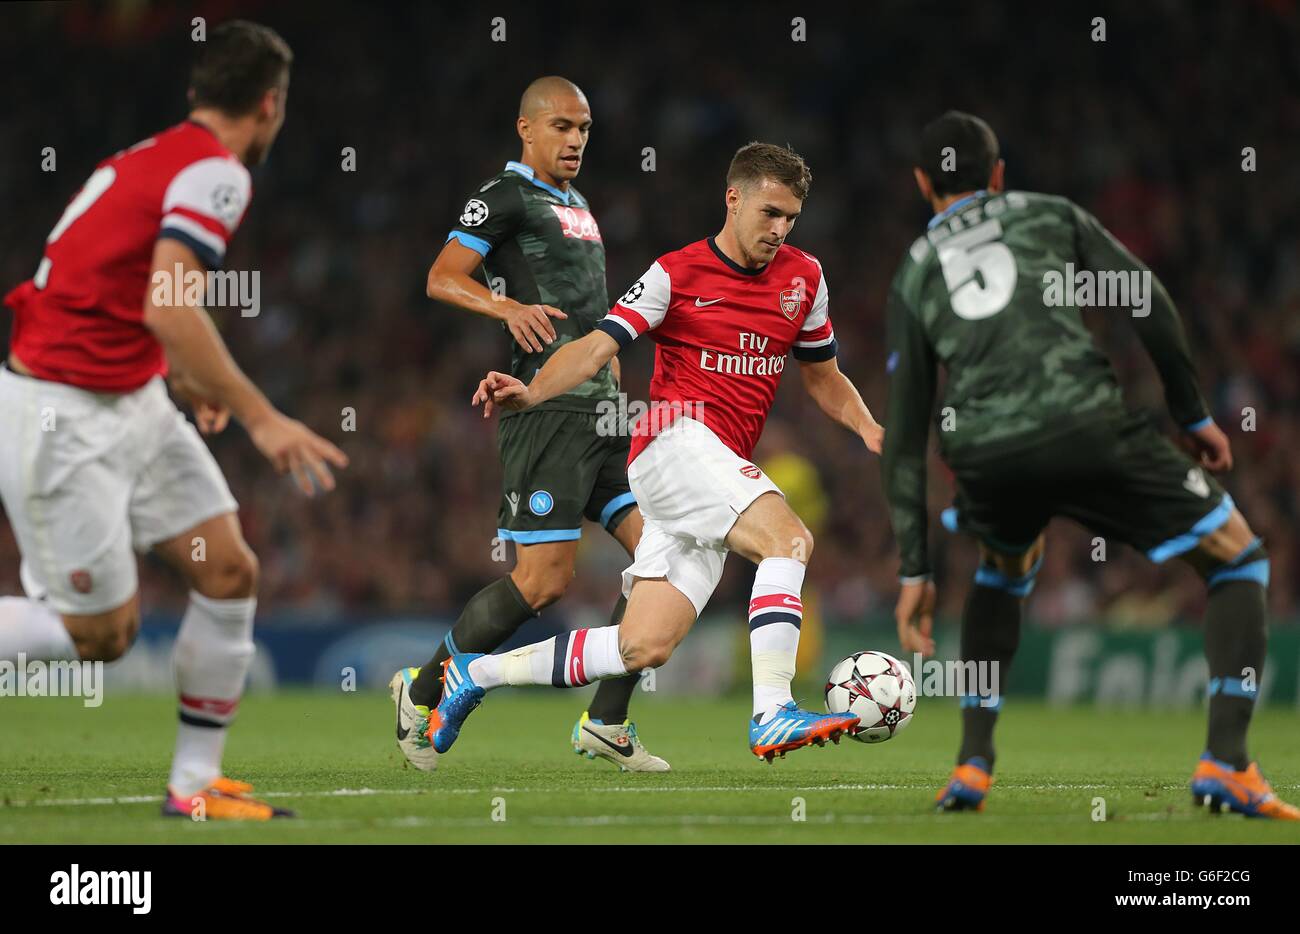 Soccer - UEFA Champions League - Group F - Arsenal v Napoli - Emirates Stadium. Arsenal's Aaron Ramsey attempts to run in between Napoli's Gokhan Inler (left) and Miguel Britos (right) Stock Photo